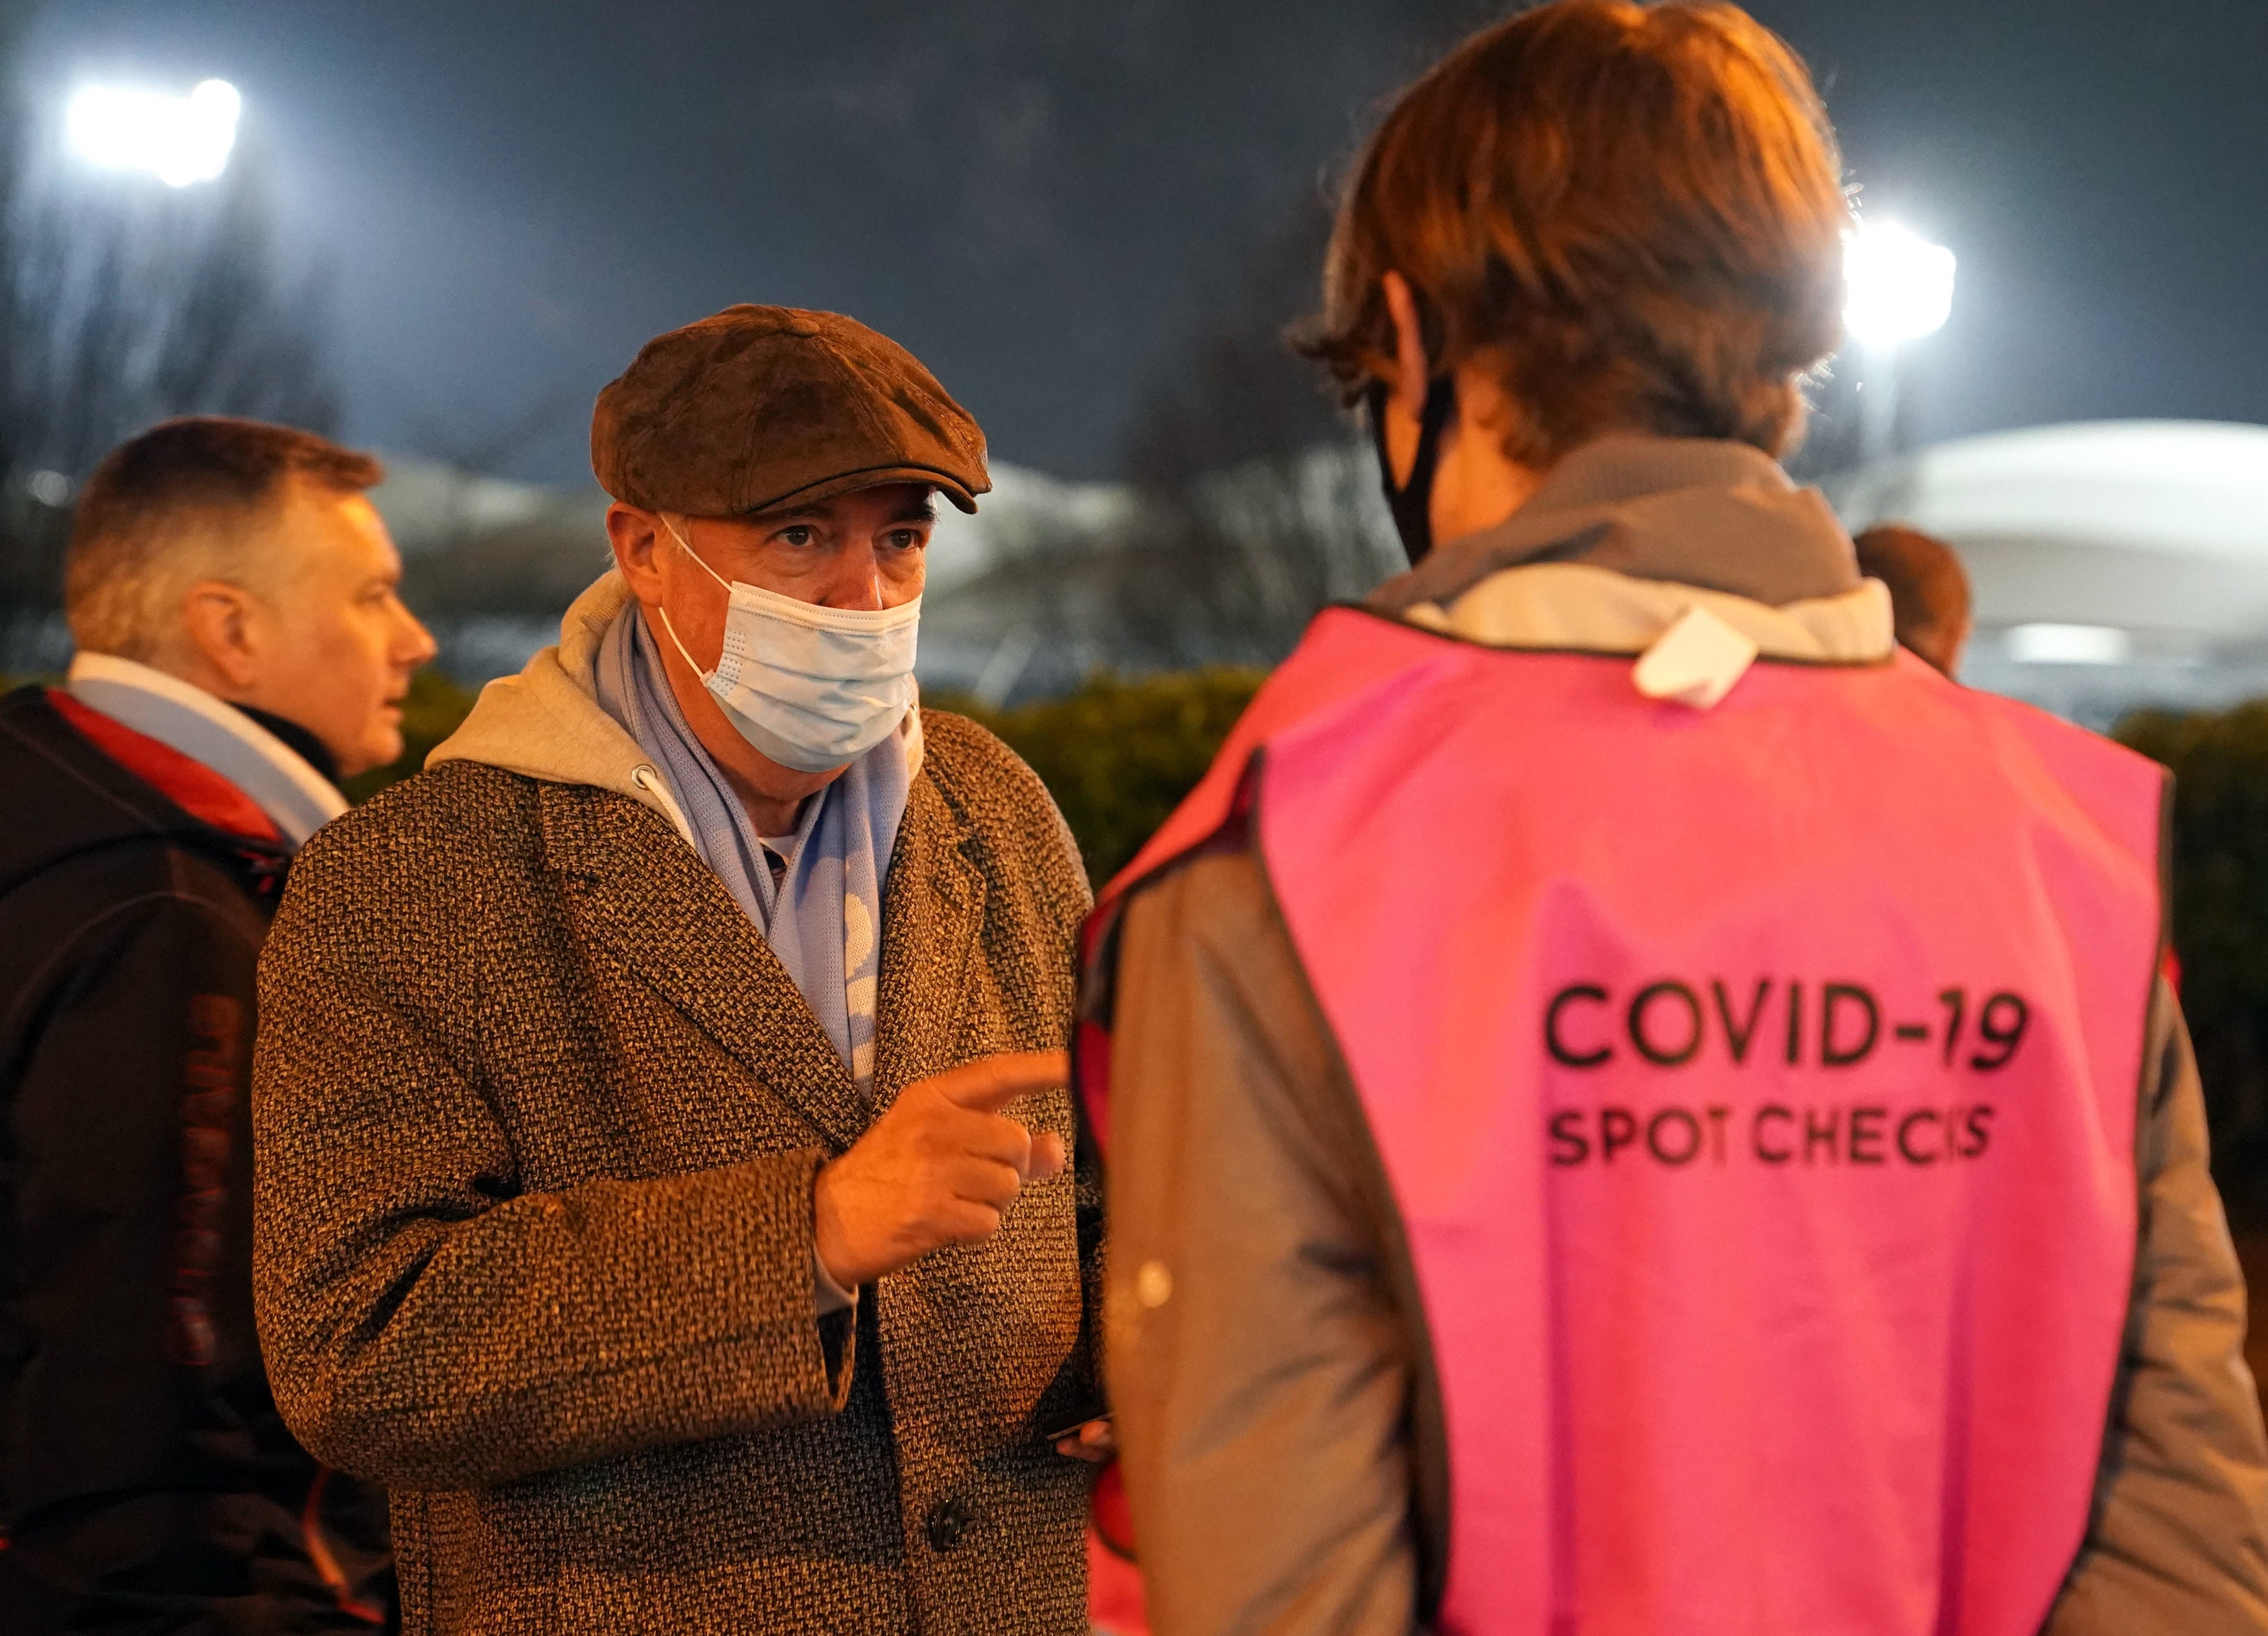 An arriving fan receives a Covid-19 spot check outside the stadium before the Premier League match between Manchester City and Leeds on Tuesday